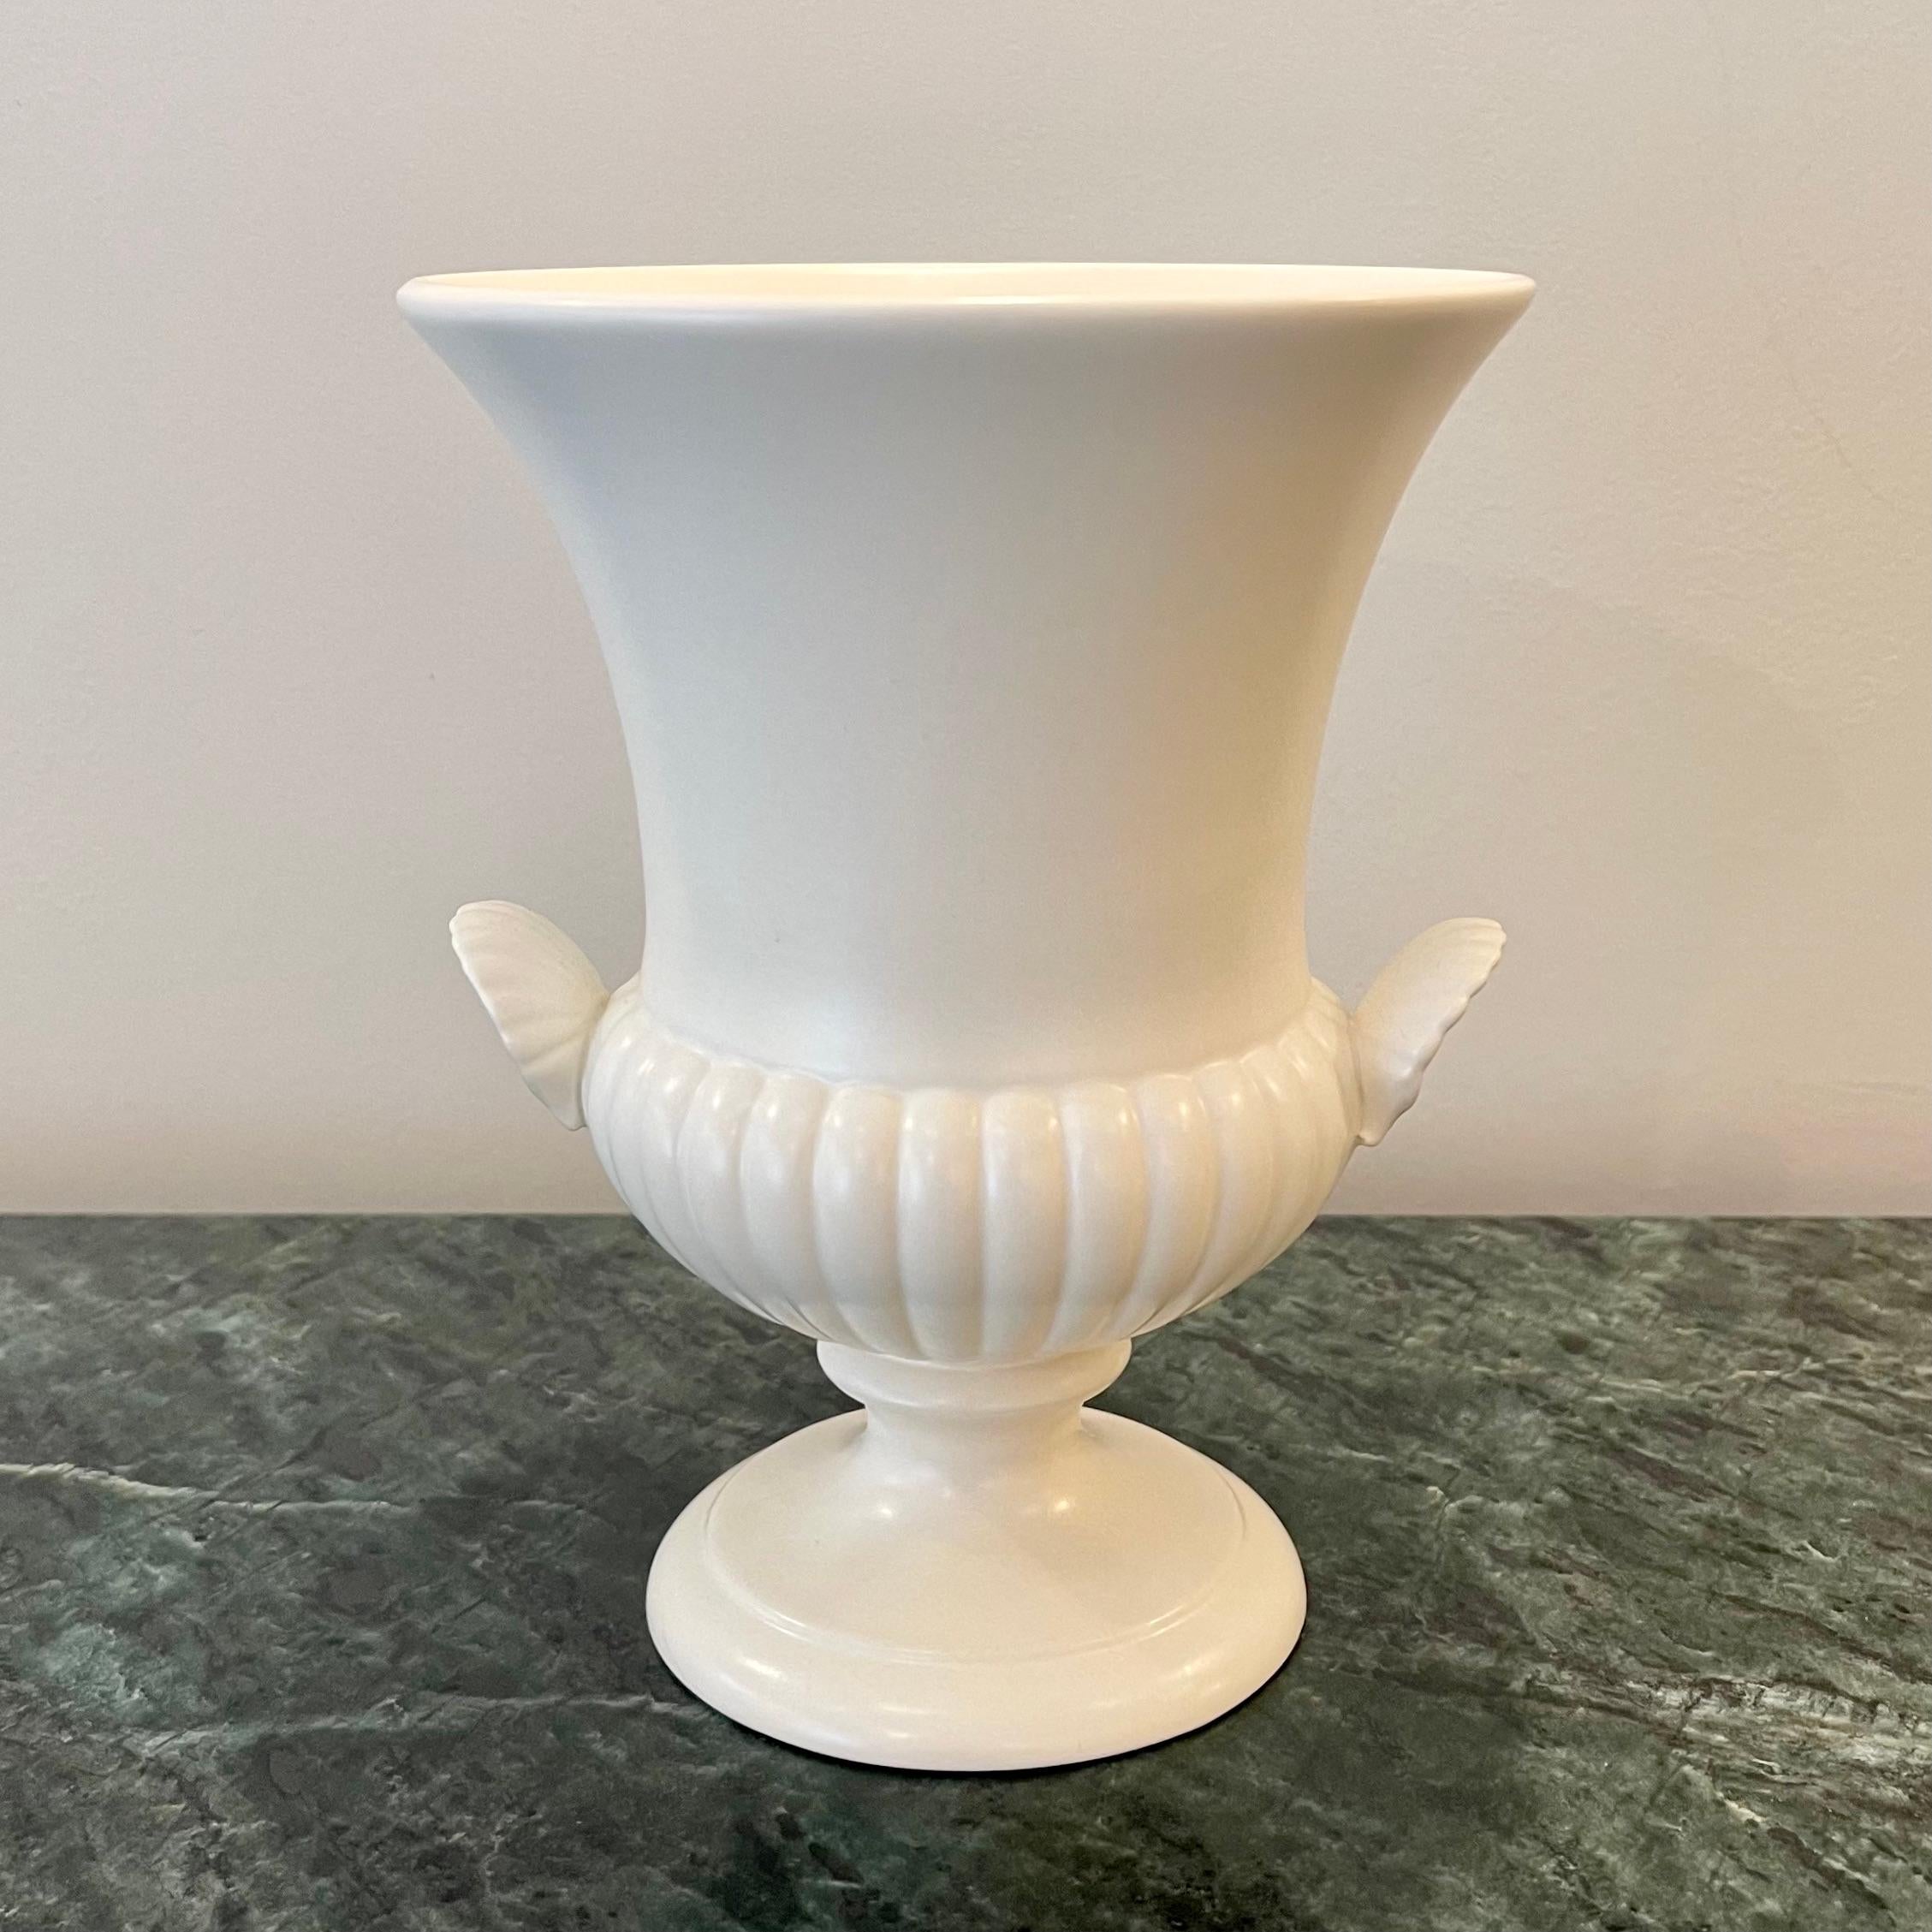 Wedgwood Moonstone Urn Vase, 1960's Norman Wilson Cream Moonstone Glaze, Twin Shell Handled Medici Urn Vase

A beautifully crafted, Wedgwood Queen's Ware, footed urn vase with a ridged lower part and twin shell handles that curve upwards. The